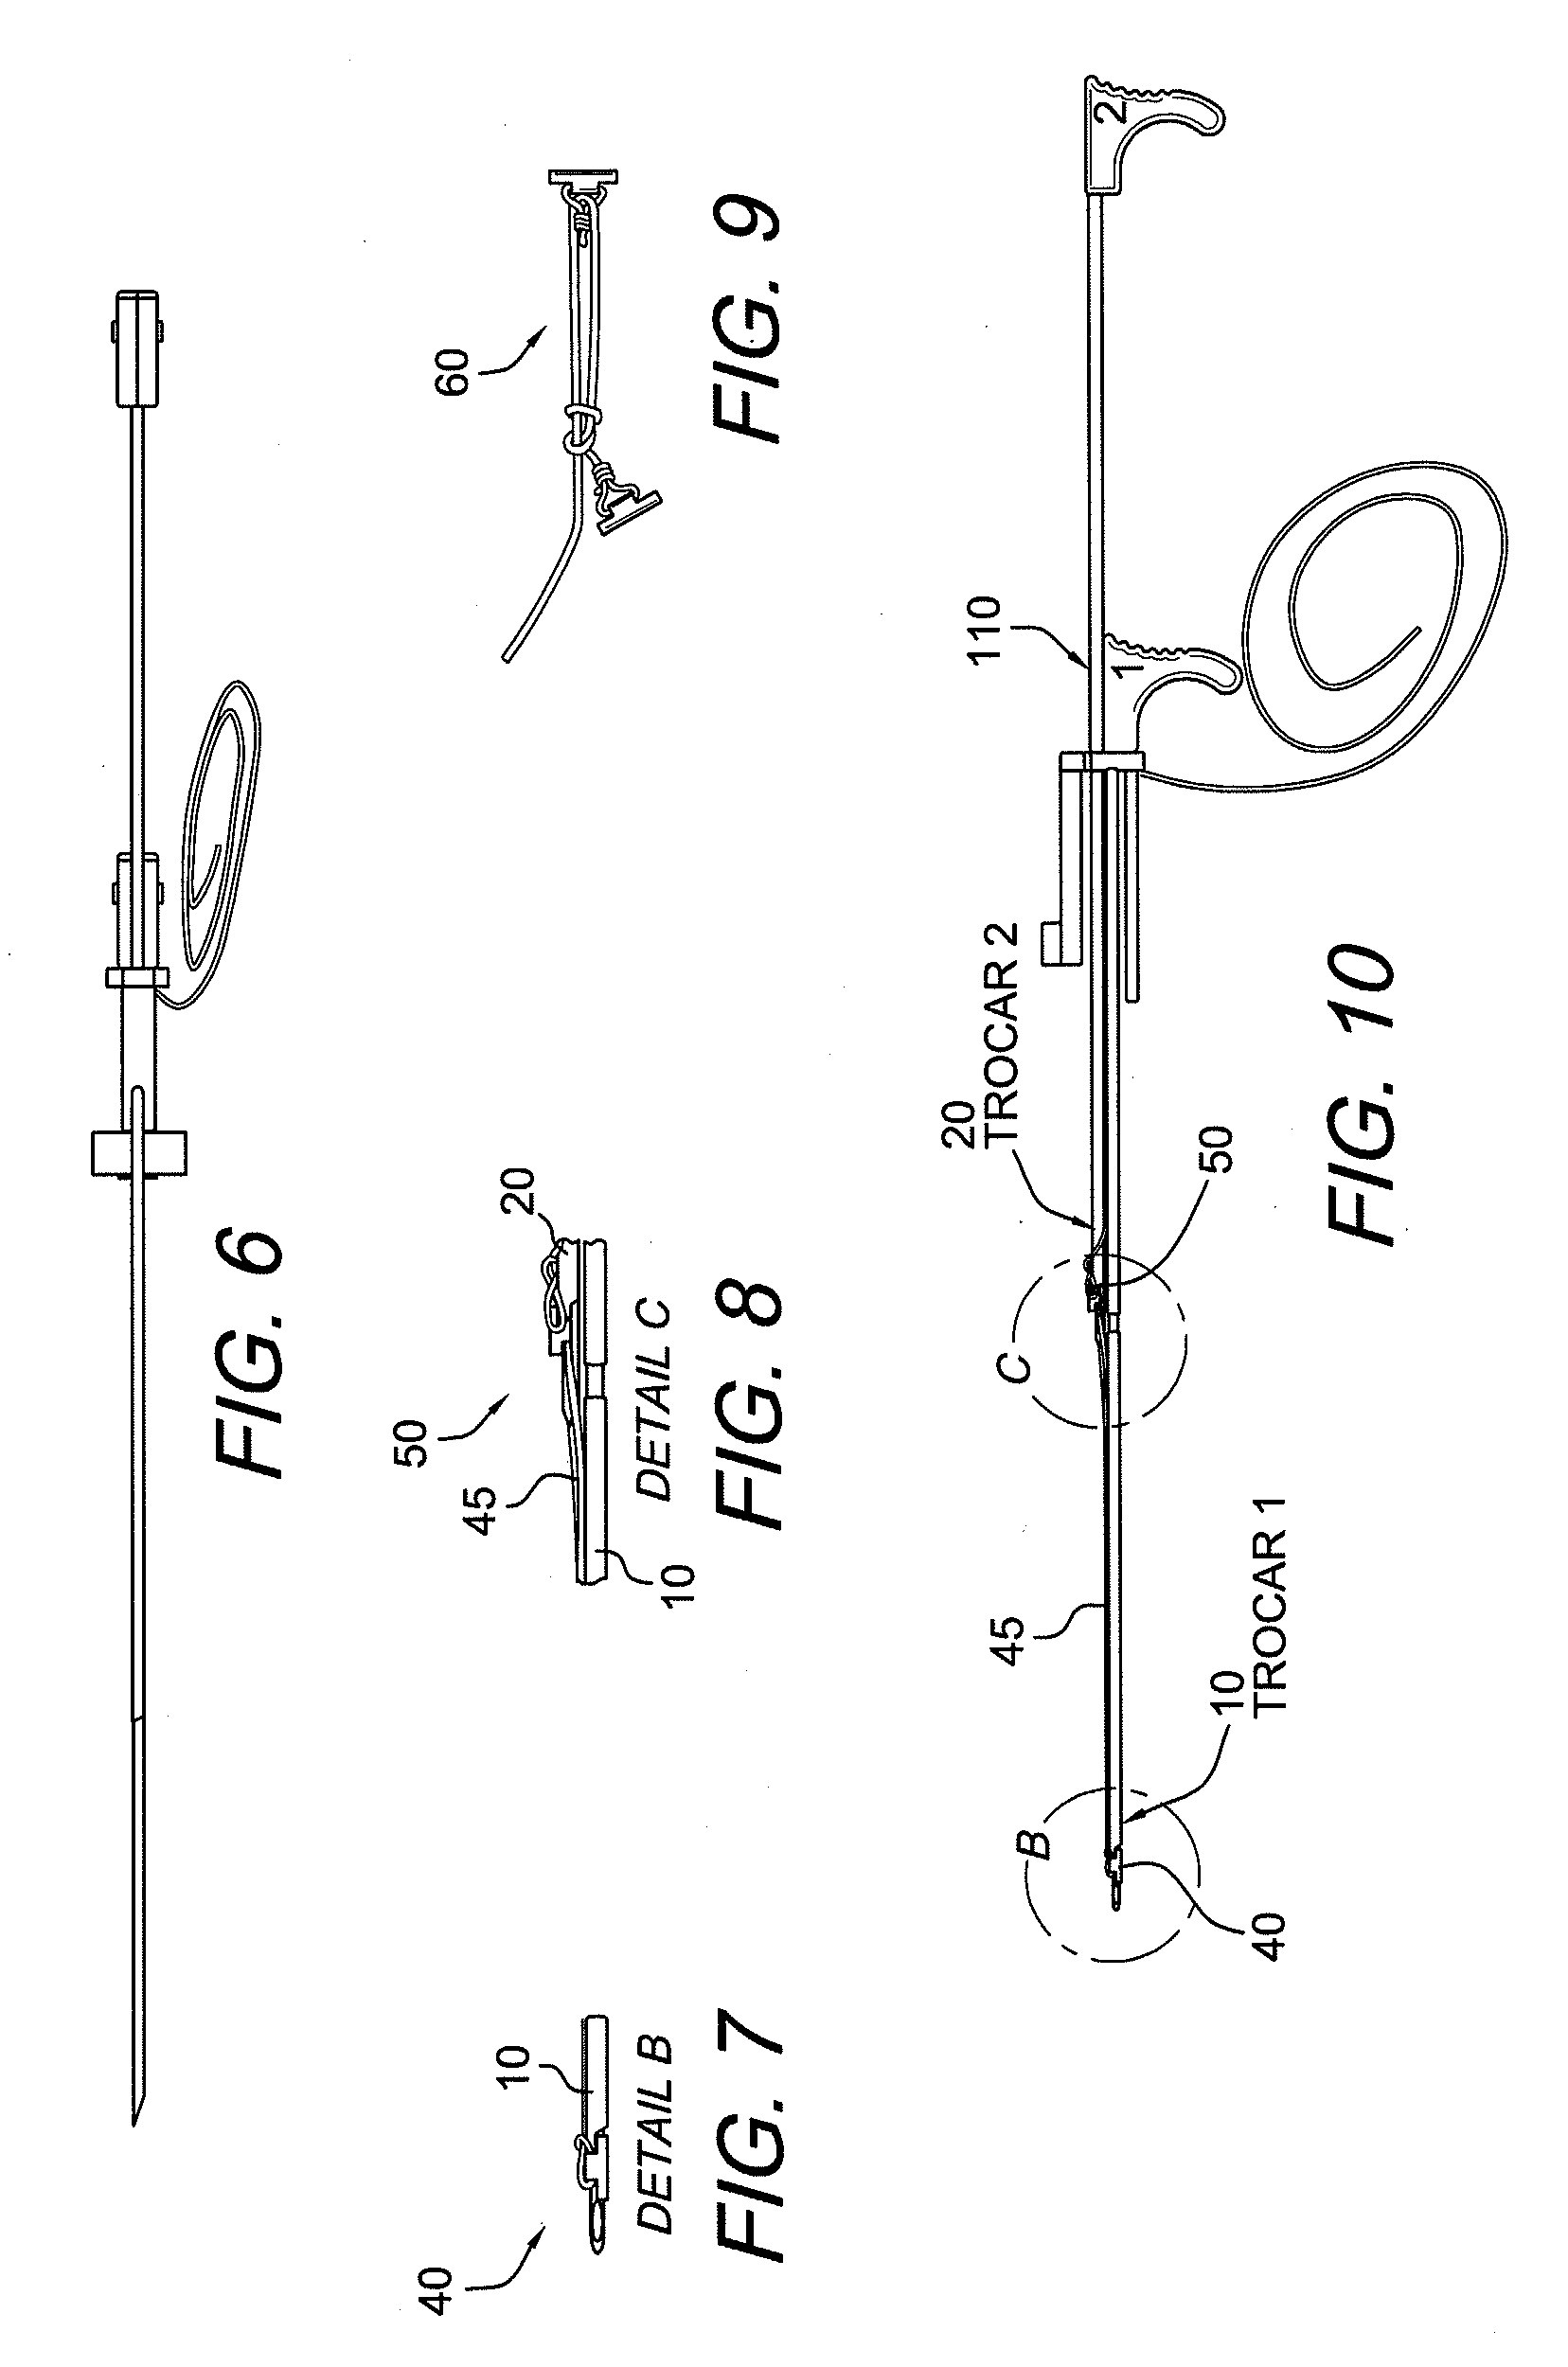 Method and system for meniscal repair using suture implant cinch construct